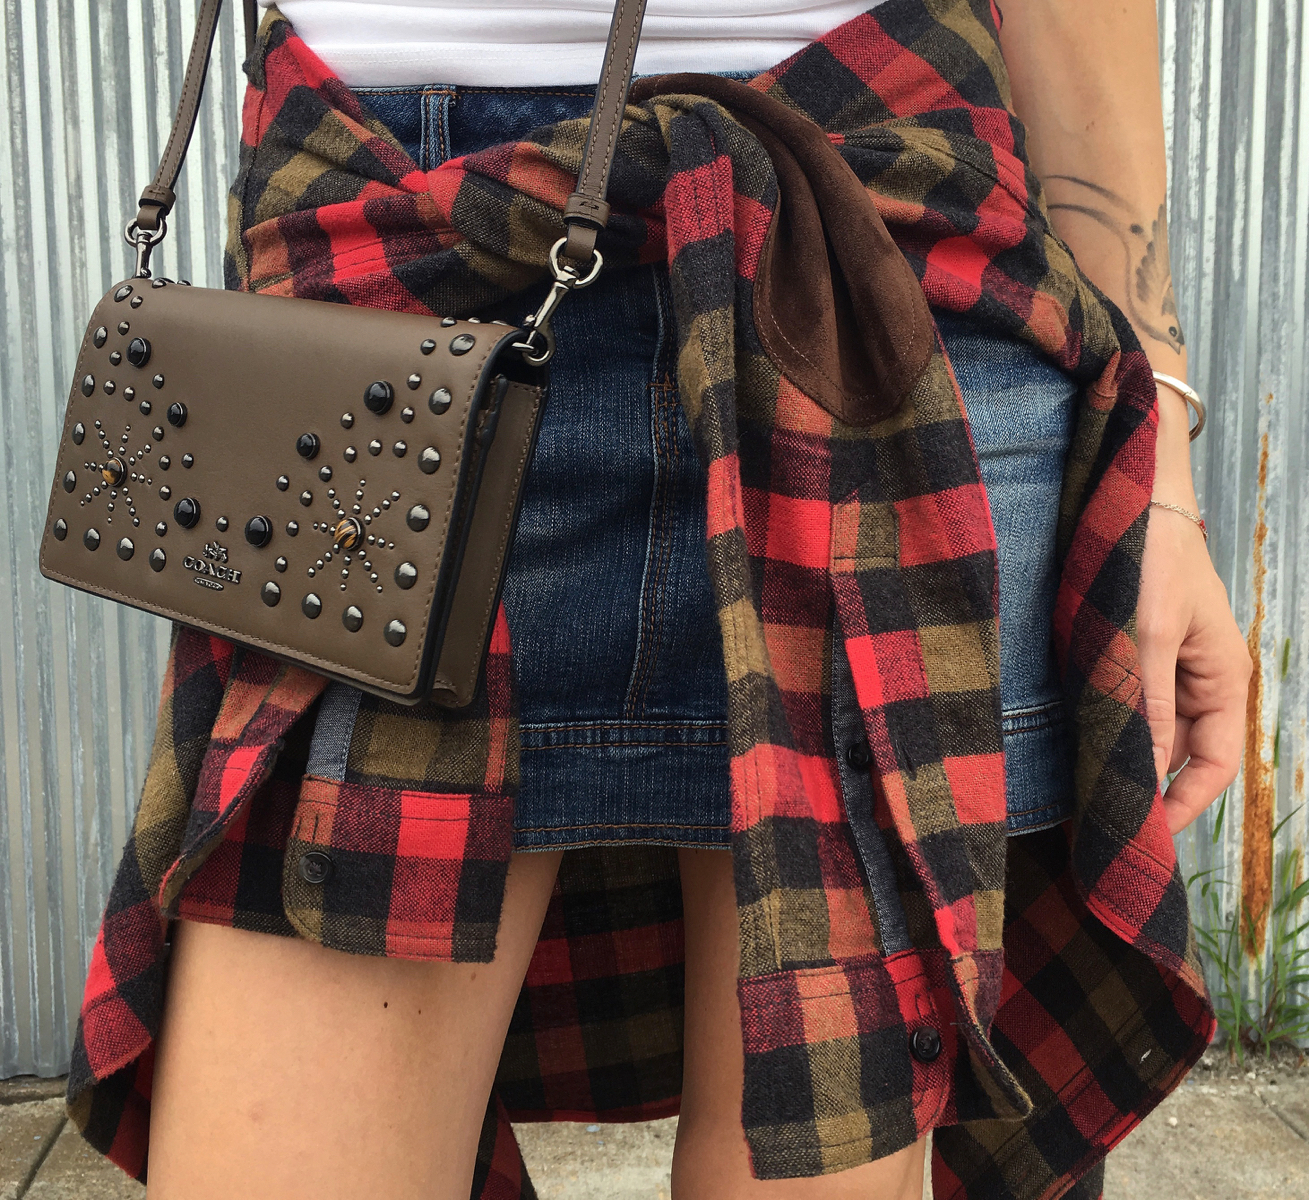 Coach studded bag with denim skirt and red flannel